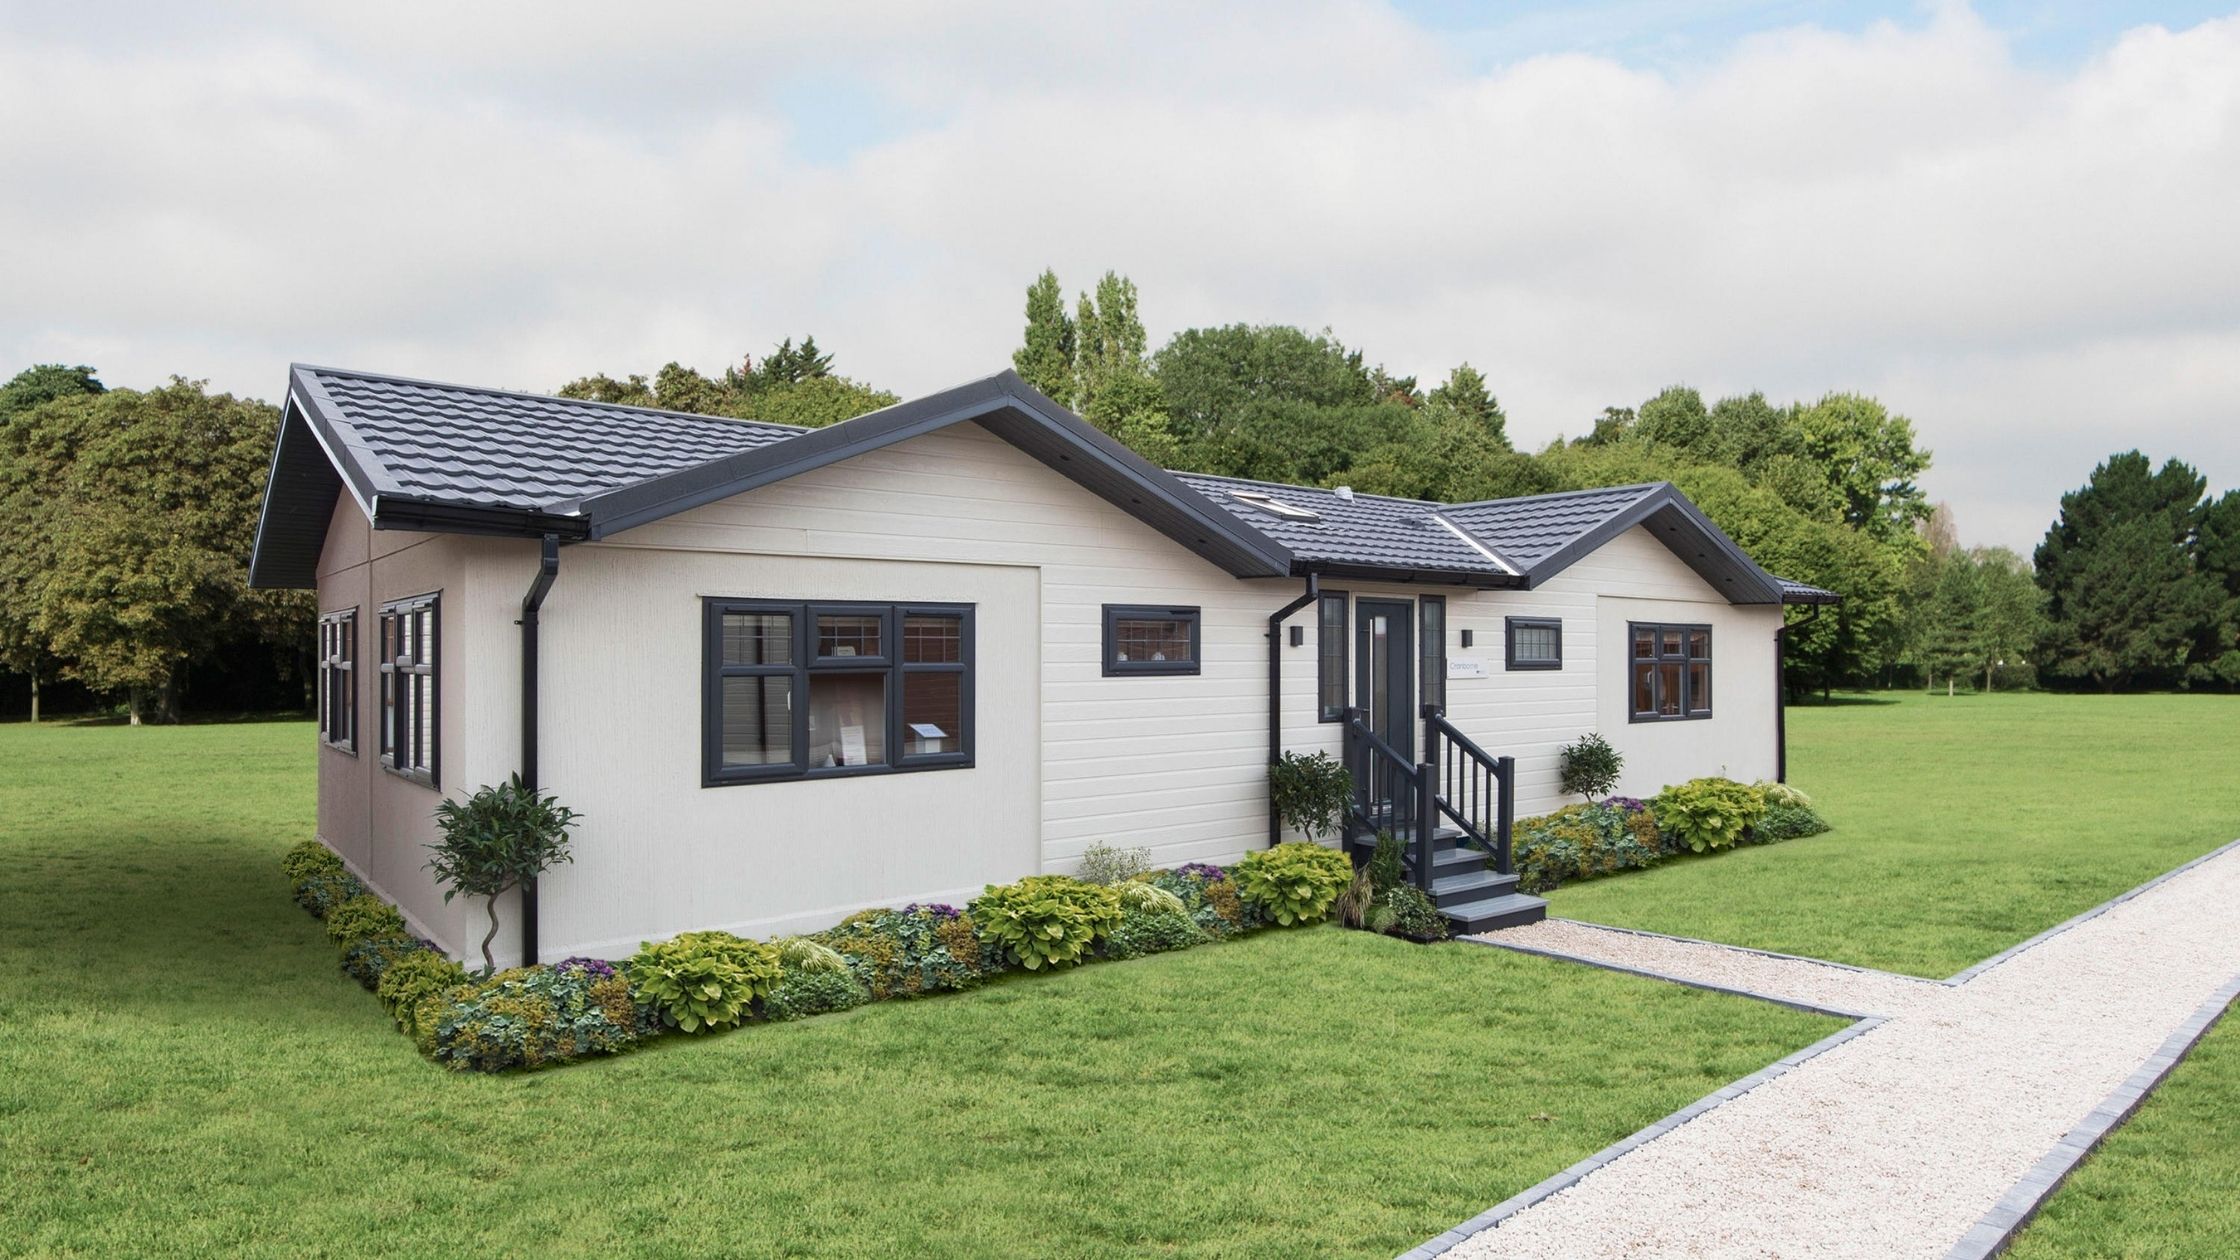 Differences Between Park Homes And Bungalows